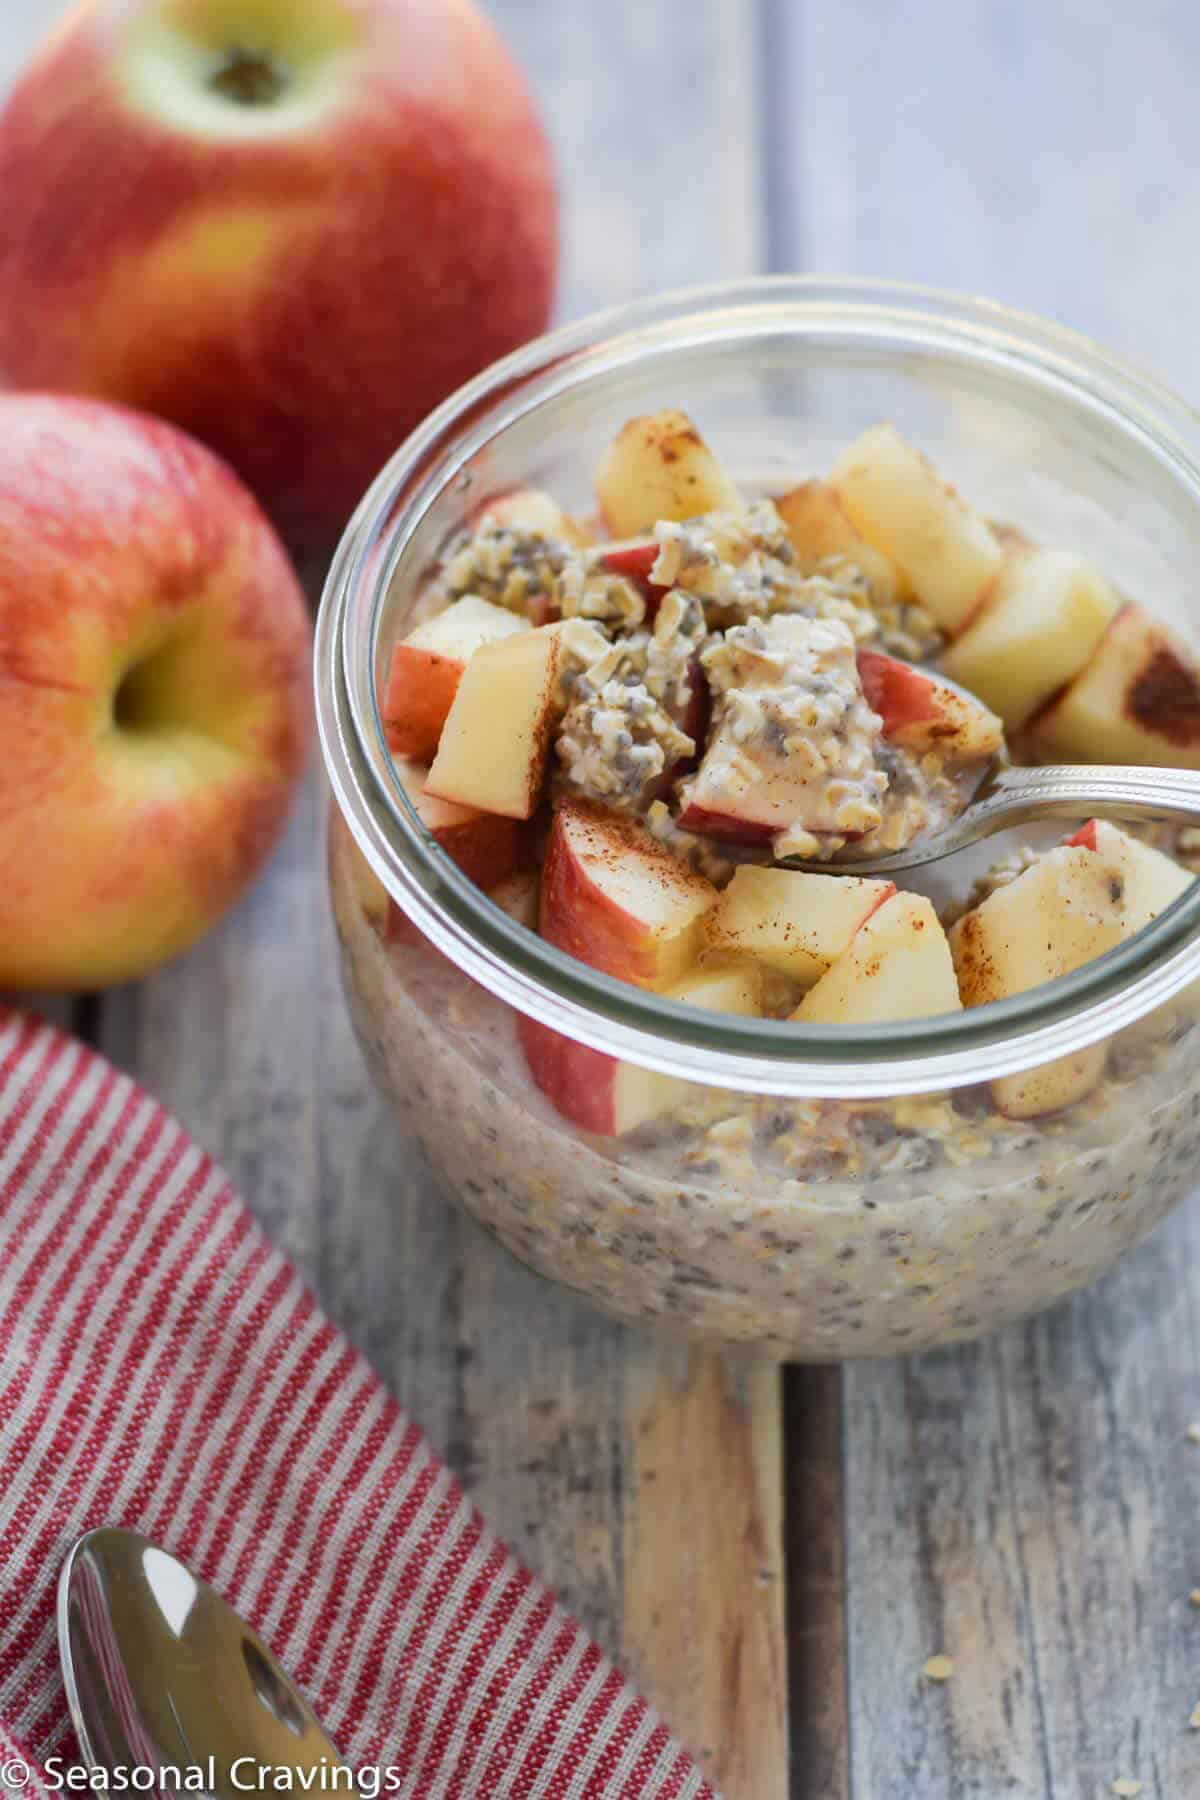 Oats with a spoon and apples on the side